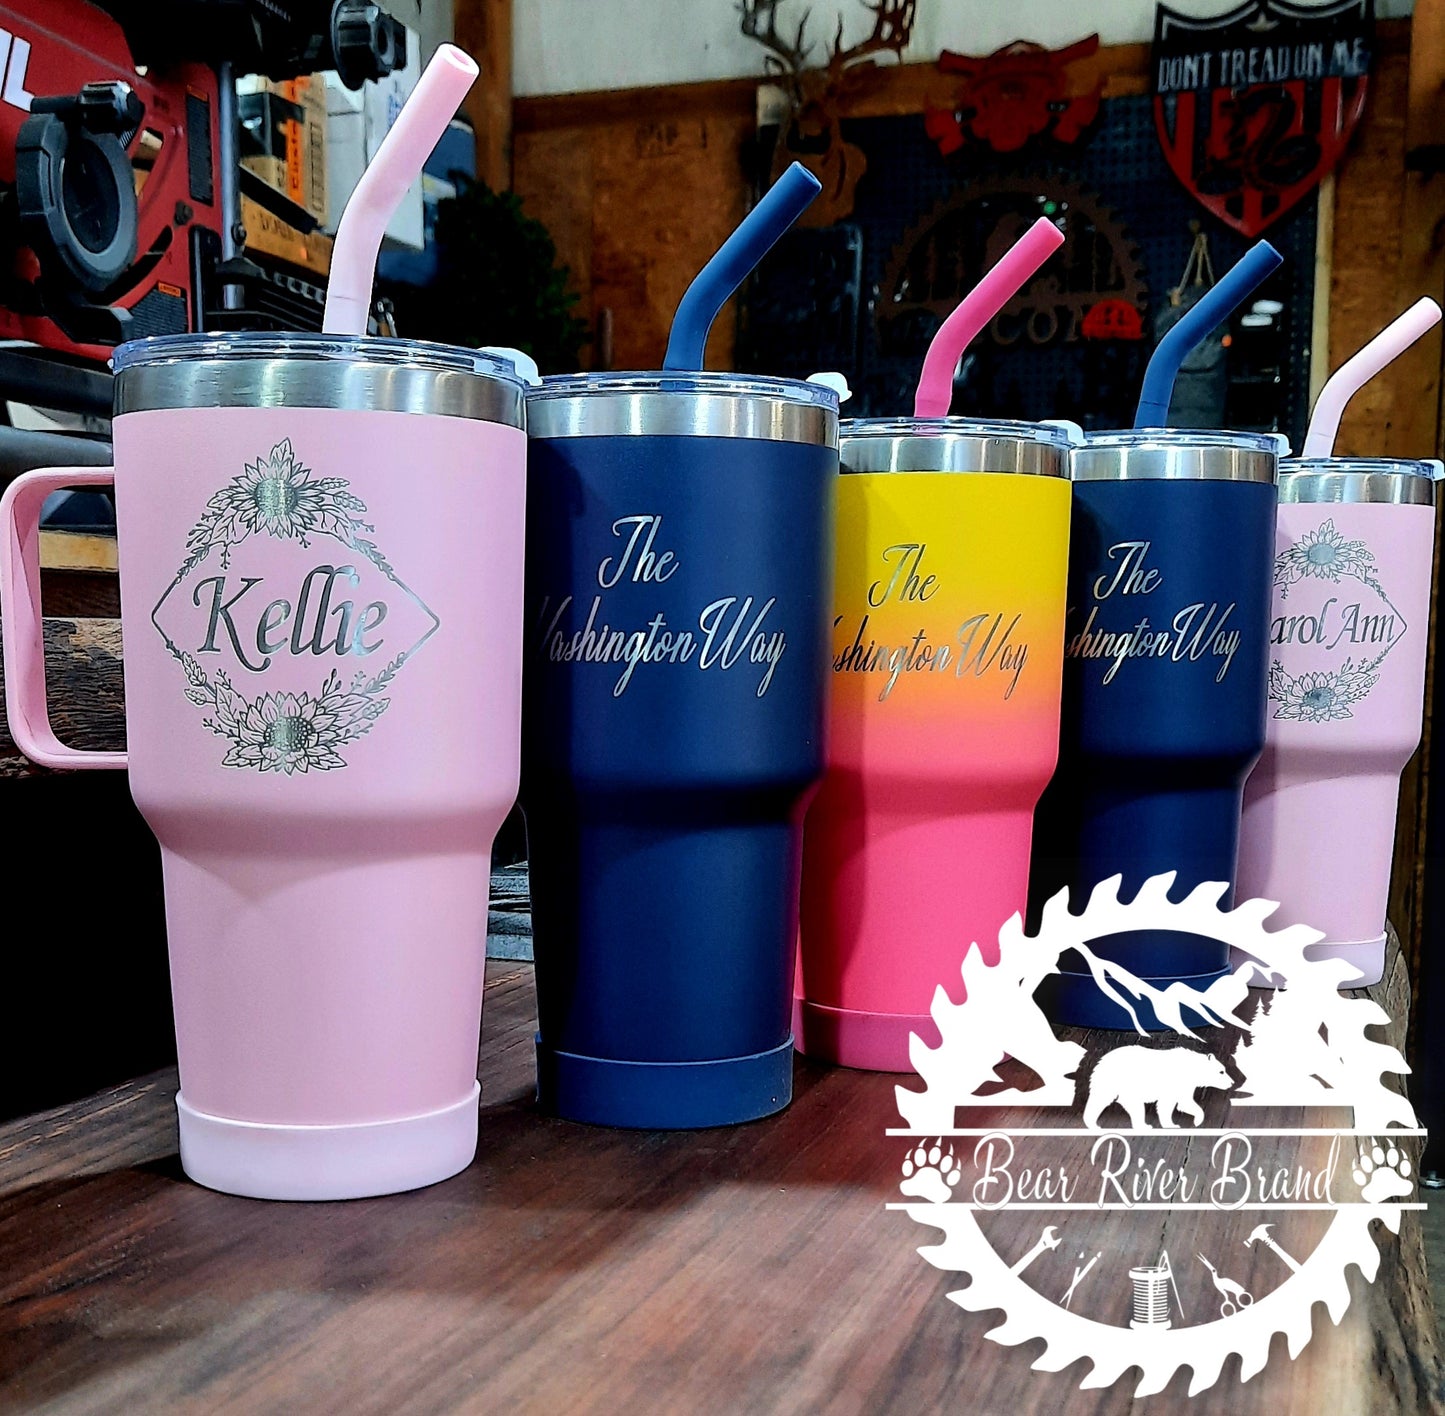 Drinkware/Tumbler Engraving Services - Contact Us